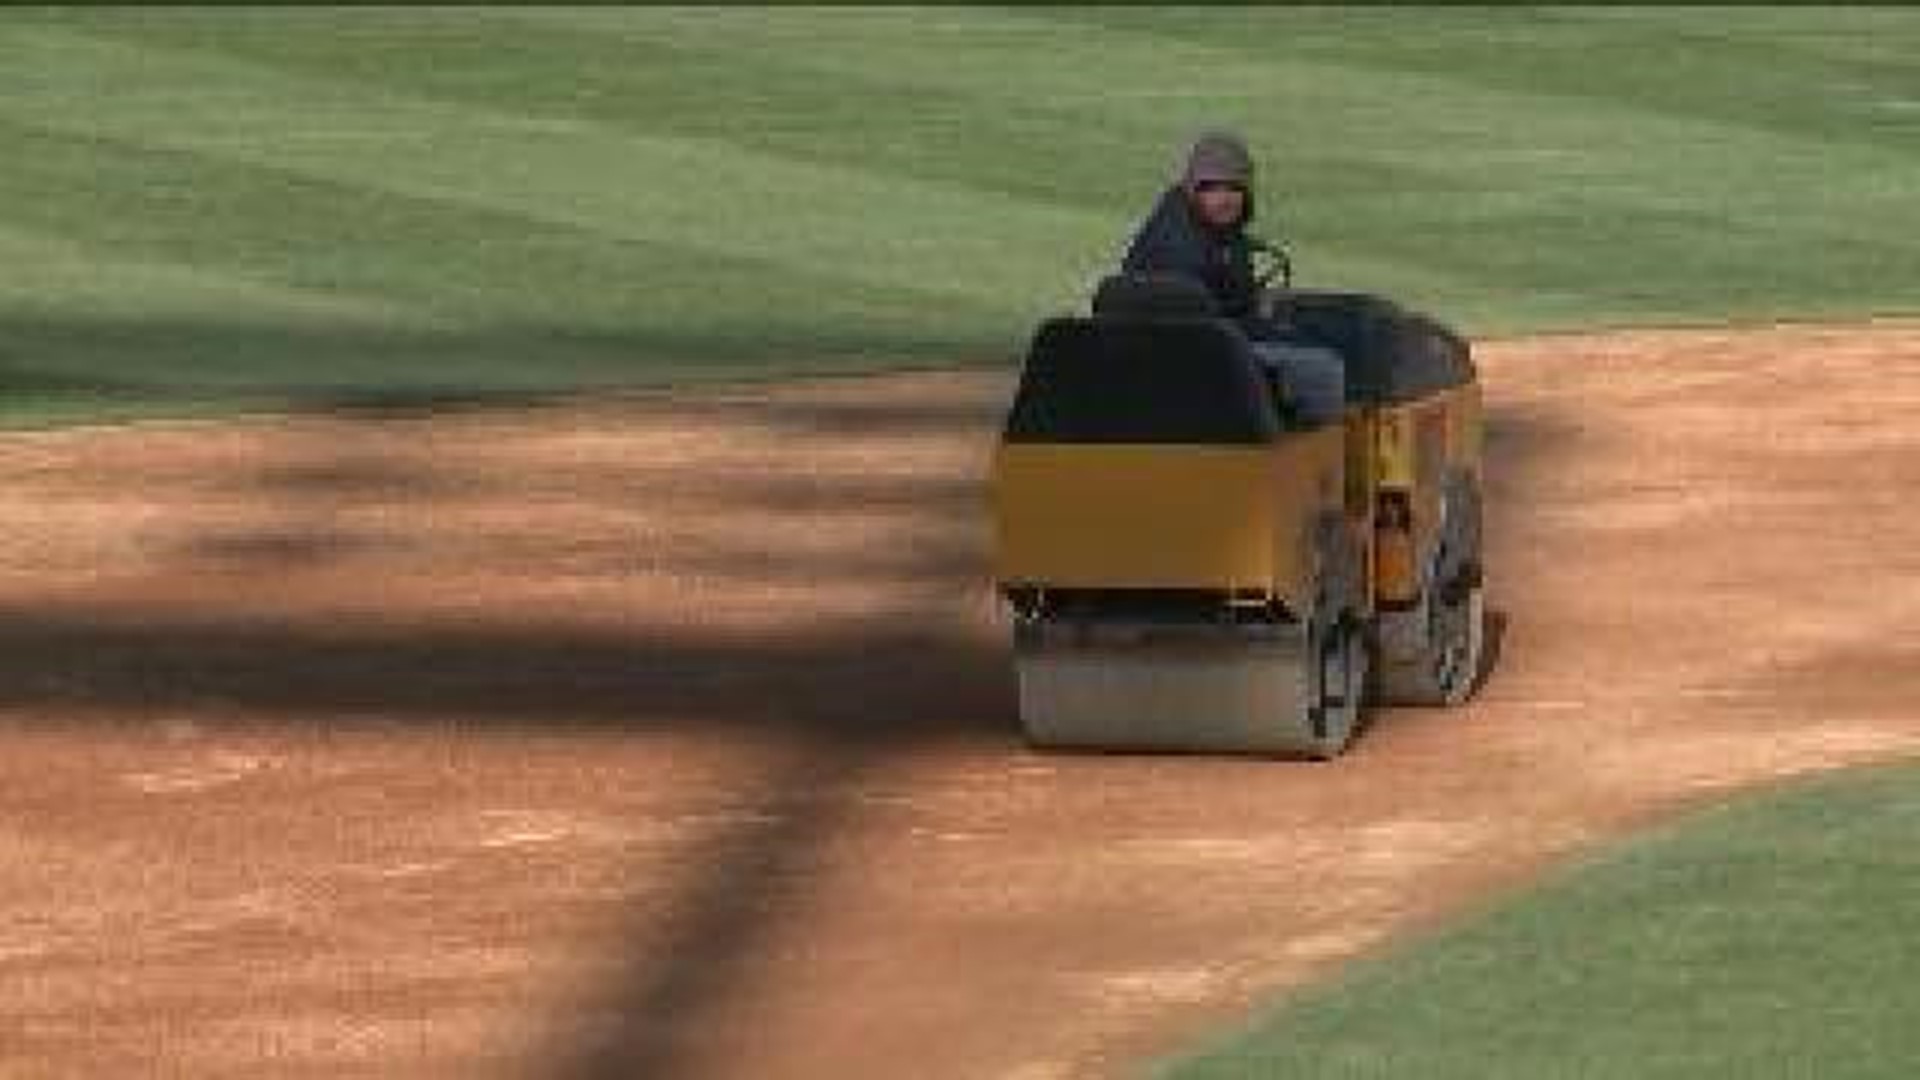 Gearing Up For Opening Day At PNC Field